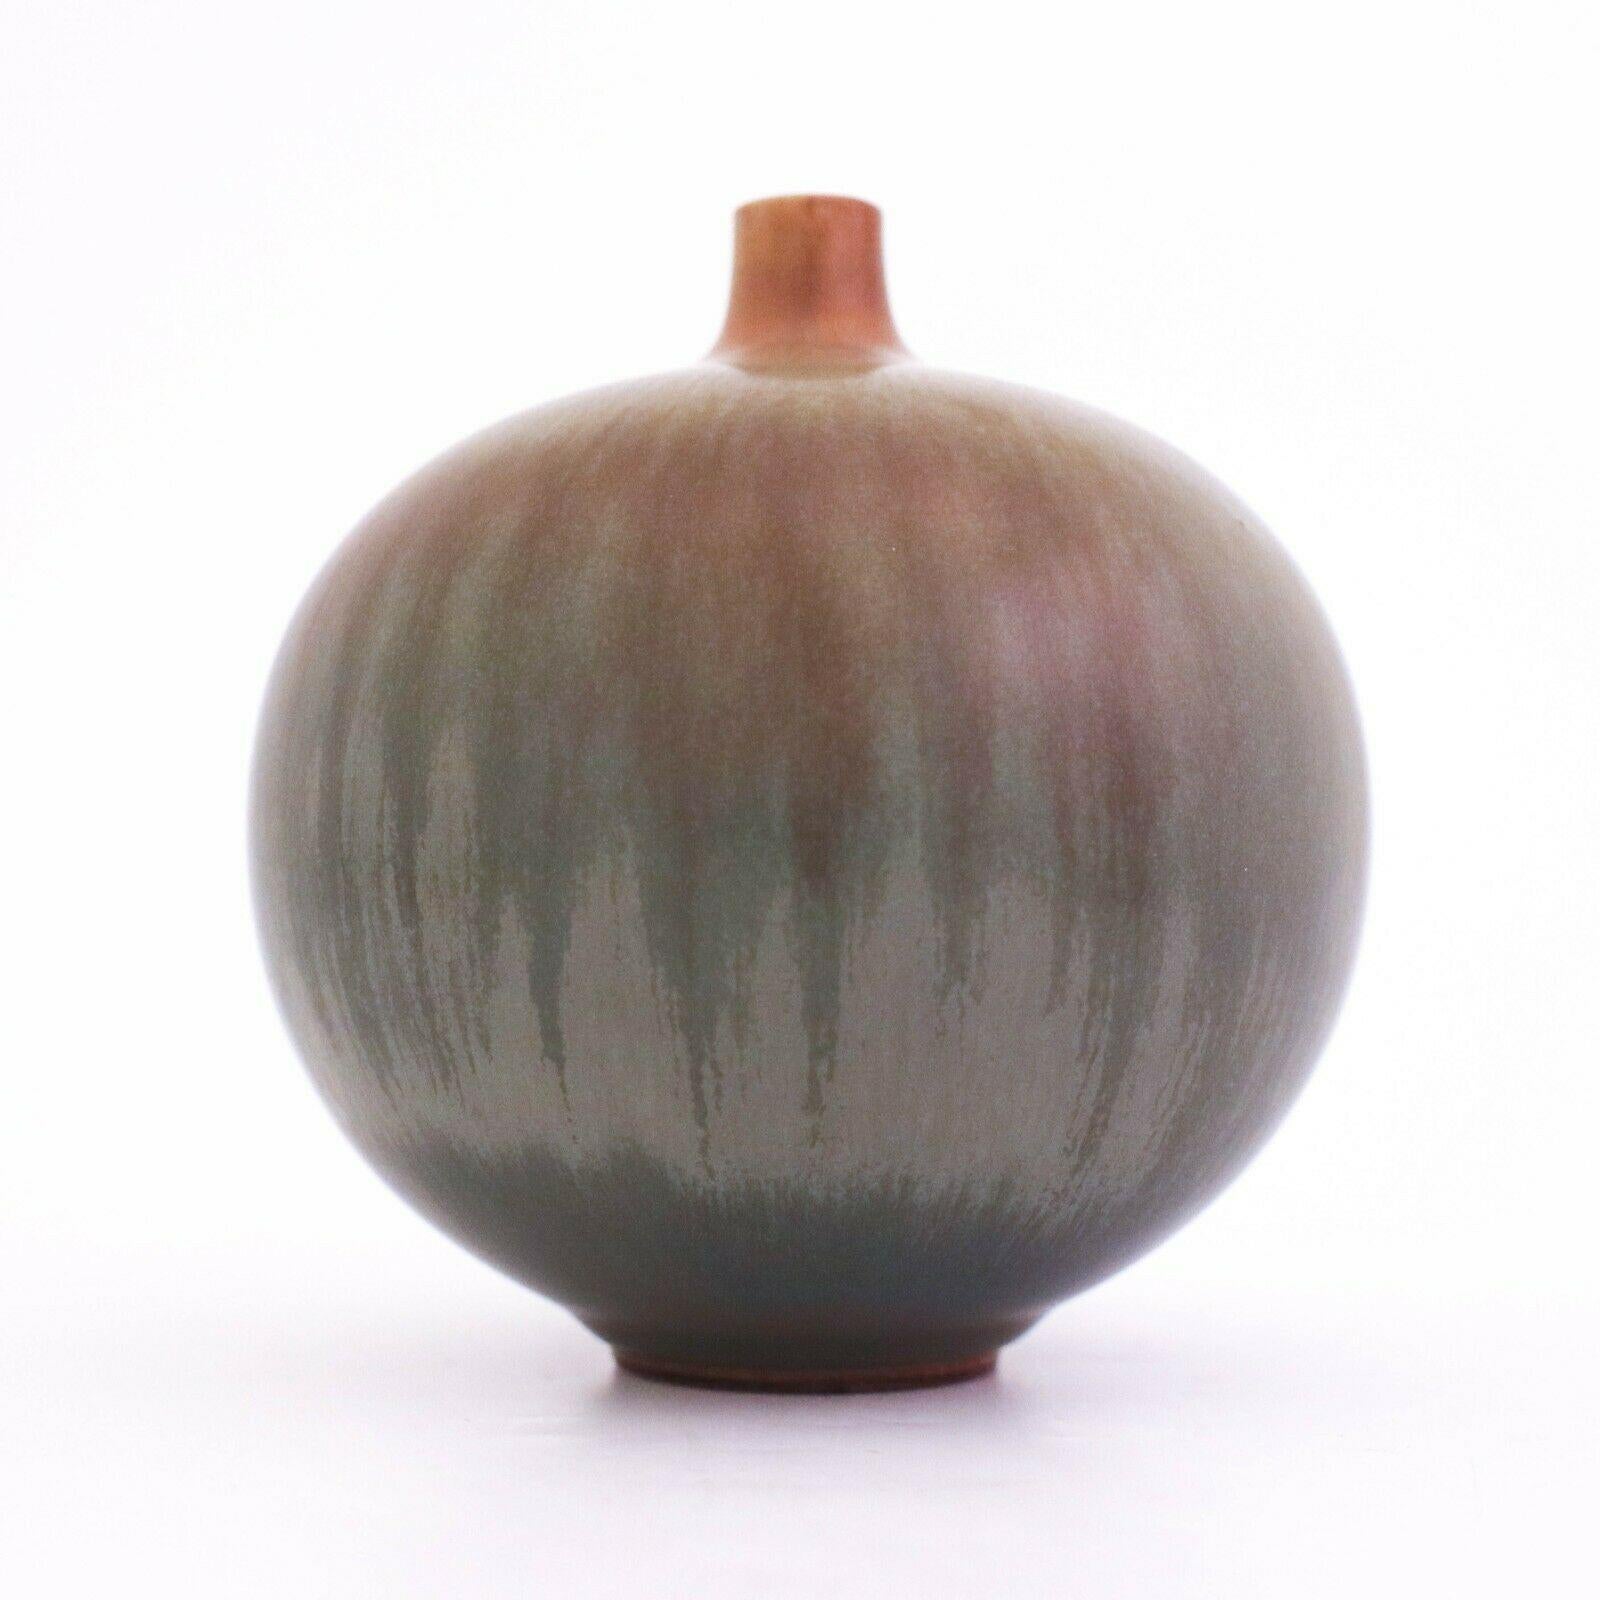 A lovely vase designed by Berndt Friberg at Gustavsberg in Stockholm, the vase is 11.5 cm high with a lovely harfur glase. It's marked as on picture and was made in 1954, it is in excellent condition.